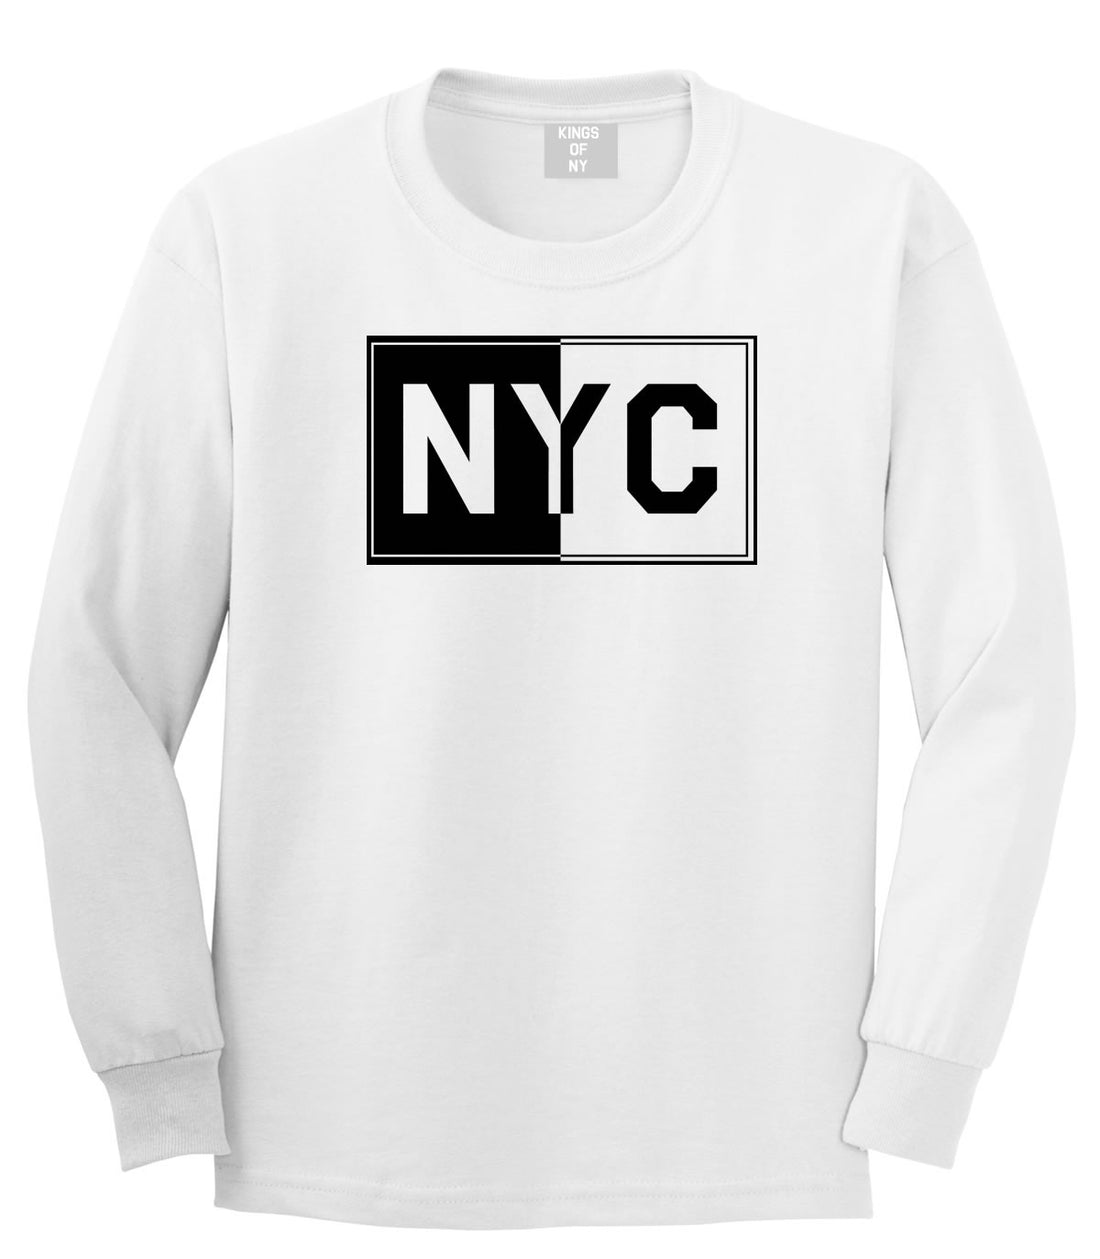 NYC Rectangle New York City Long Sleeve T-Shirt in White By Kings Of NY